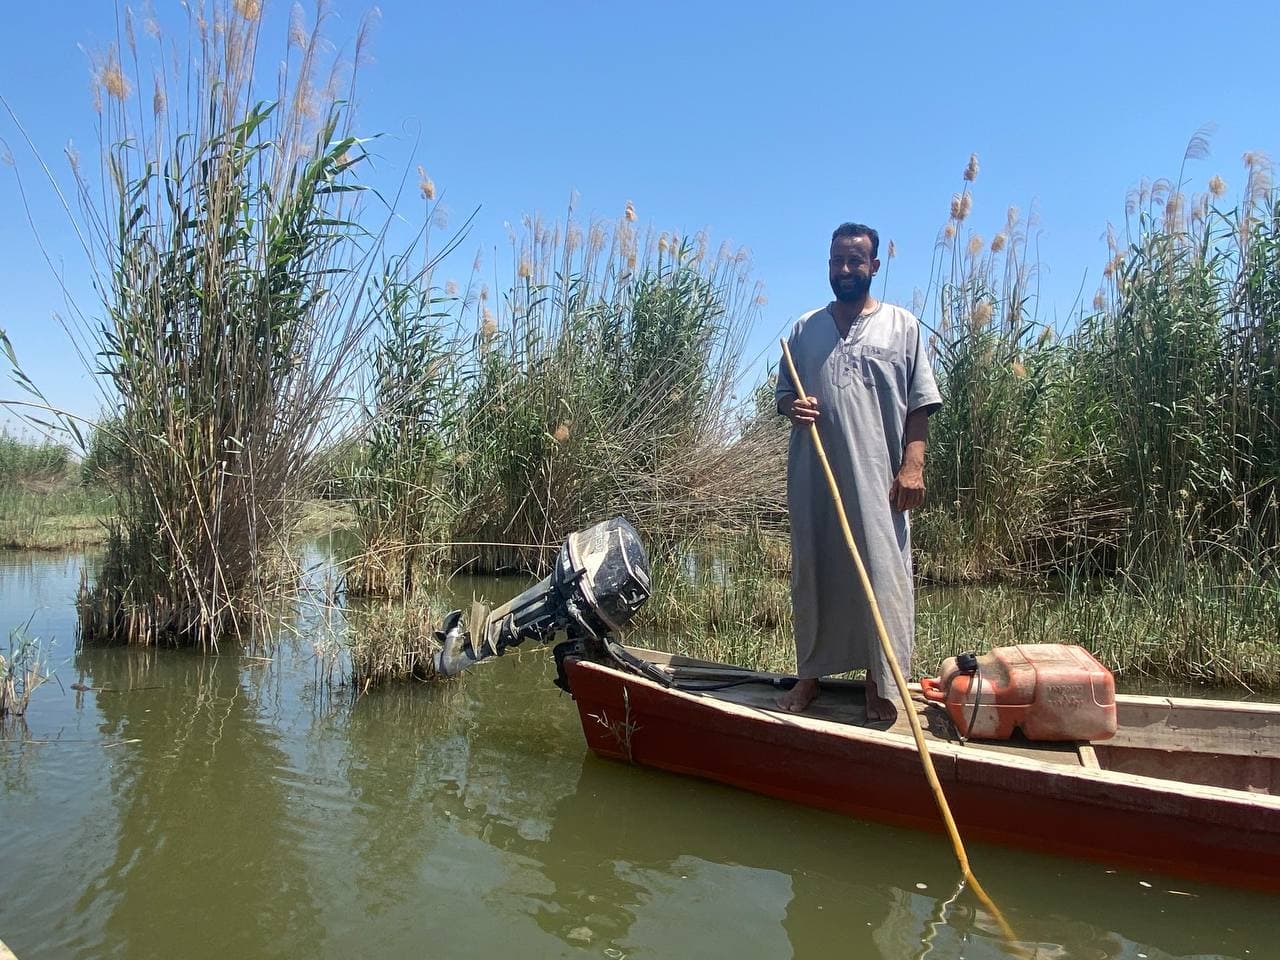 Mesopotamia Marshes and Cultural Heritage of Iraq Threatened by the Makhoul Dam